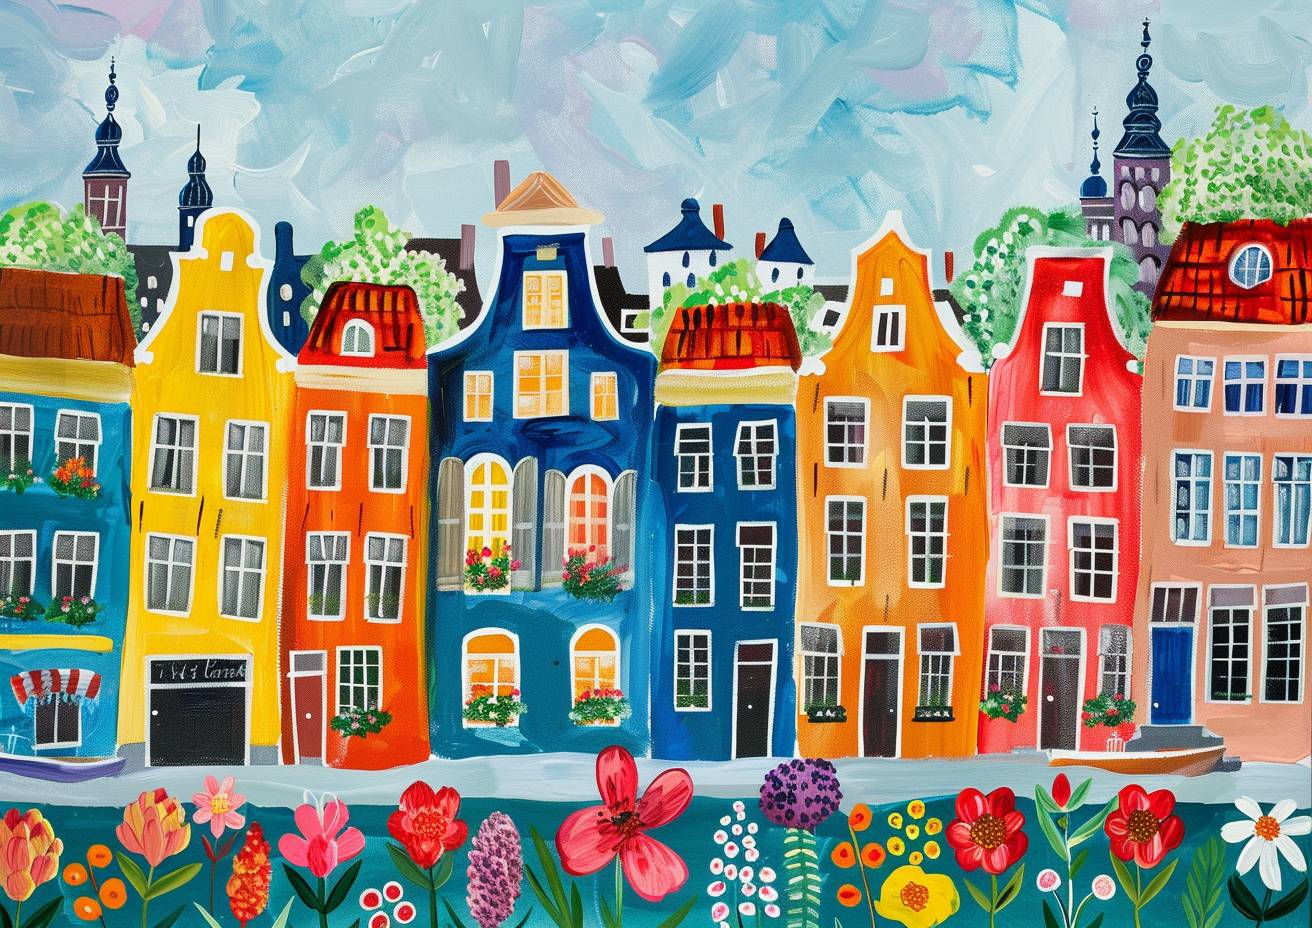 Amsterdam, charming street lined with colorful townhouses, flowers, summertime, England, most unique naive art amazing painting by Sophie Blackall and Maud Lewis and Chagall, amazing brushstrokes, sharp, high quality, masterpiece, ultrasharp,